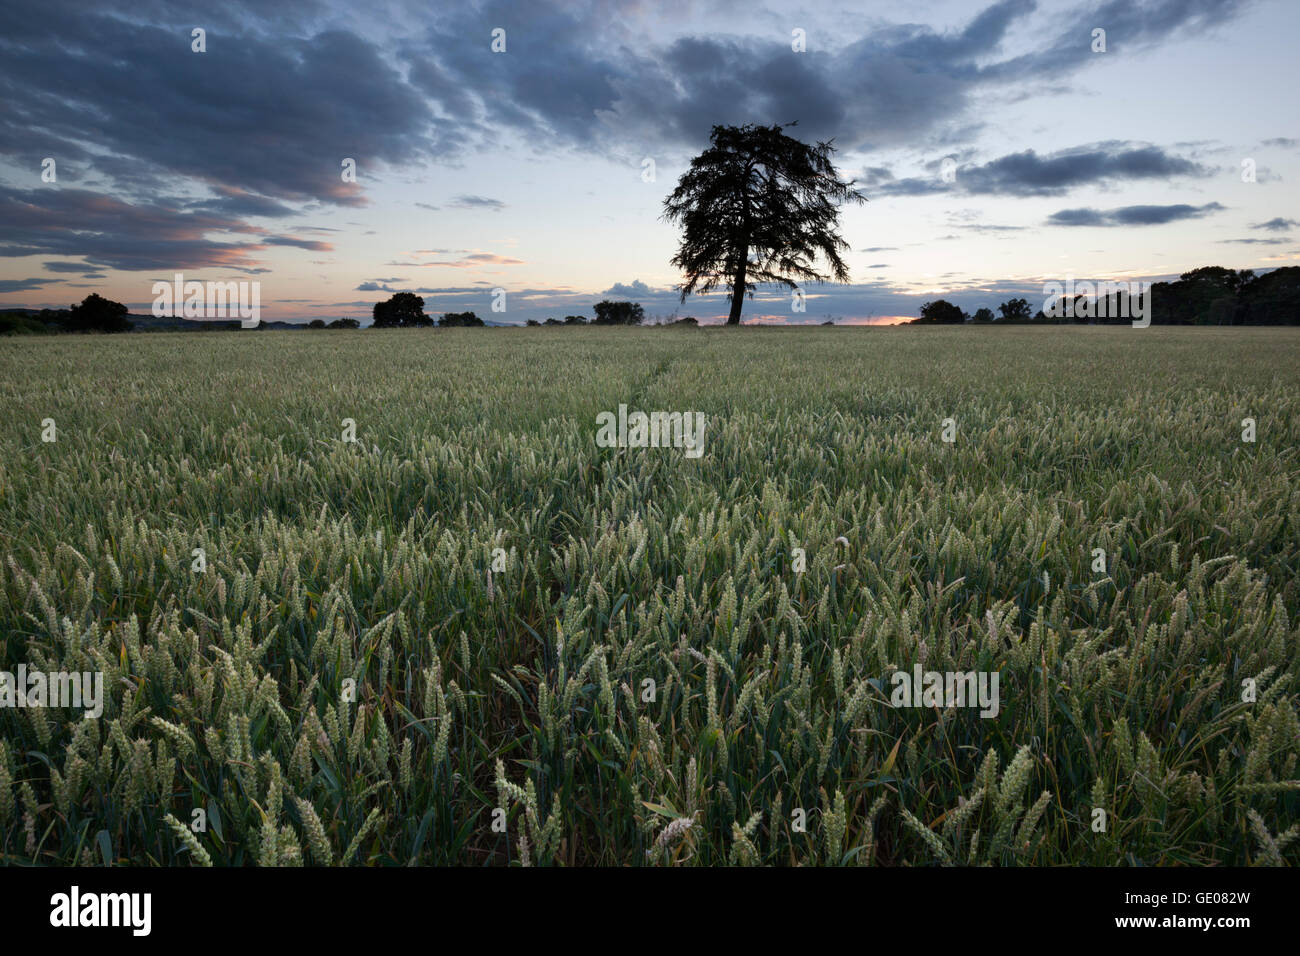 Wheat field and pine tree at sunset, near Chipping Campden, Cotswolds, Gloucestershire, England, United Kingdom, Europe Stock Photo